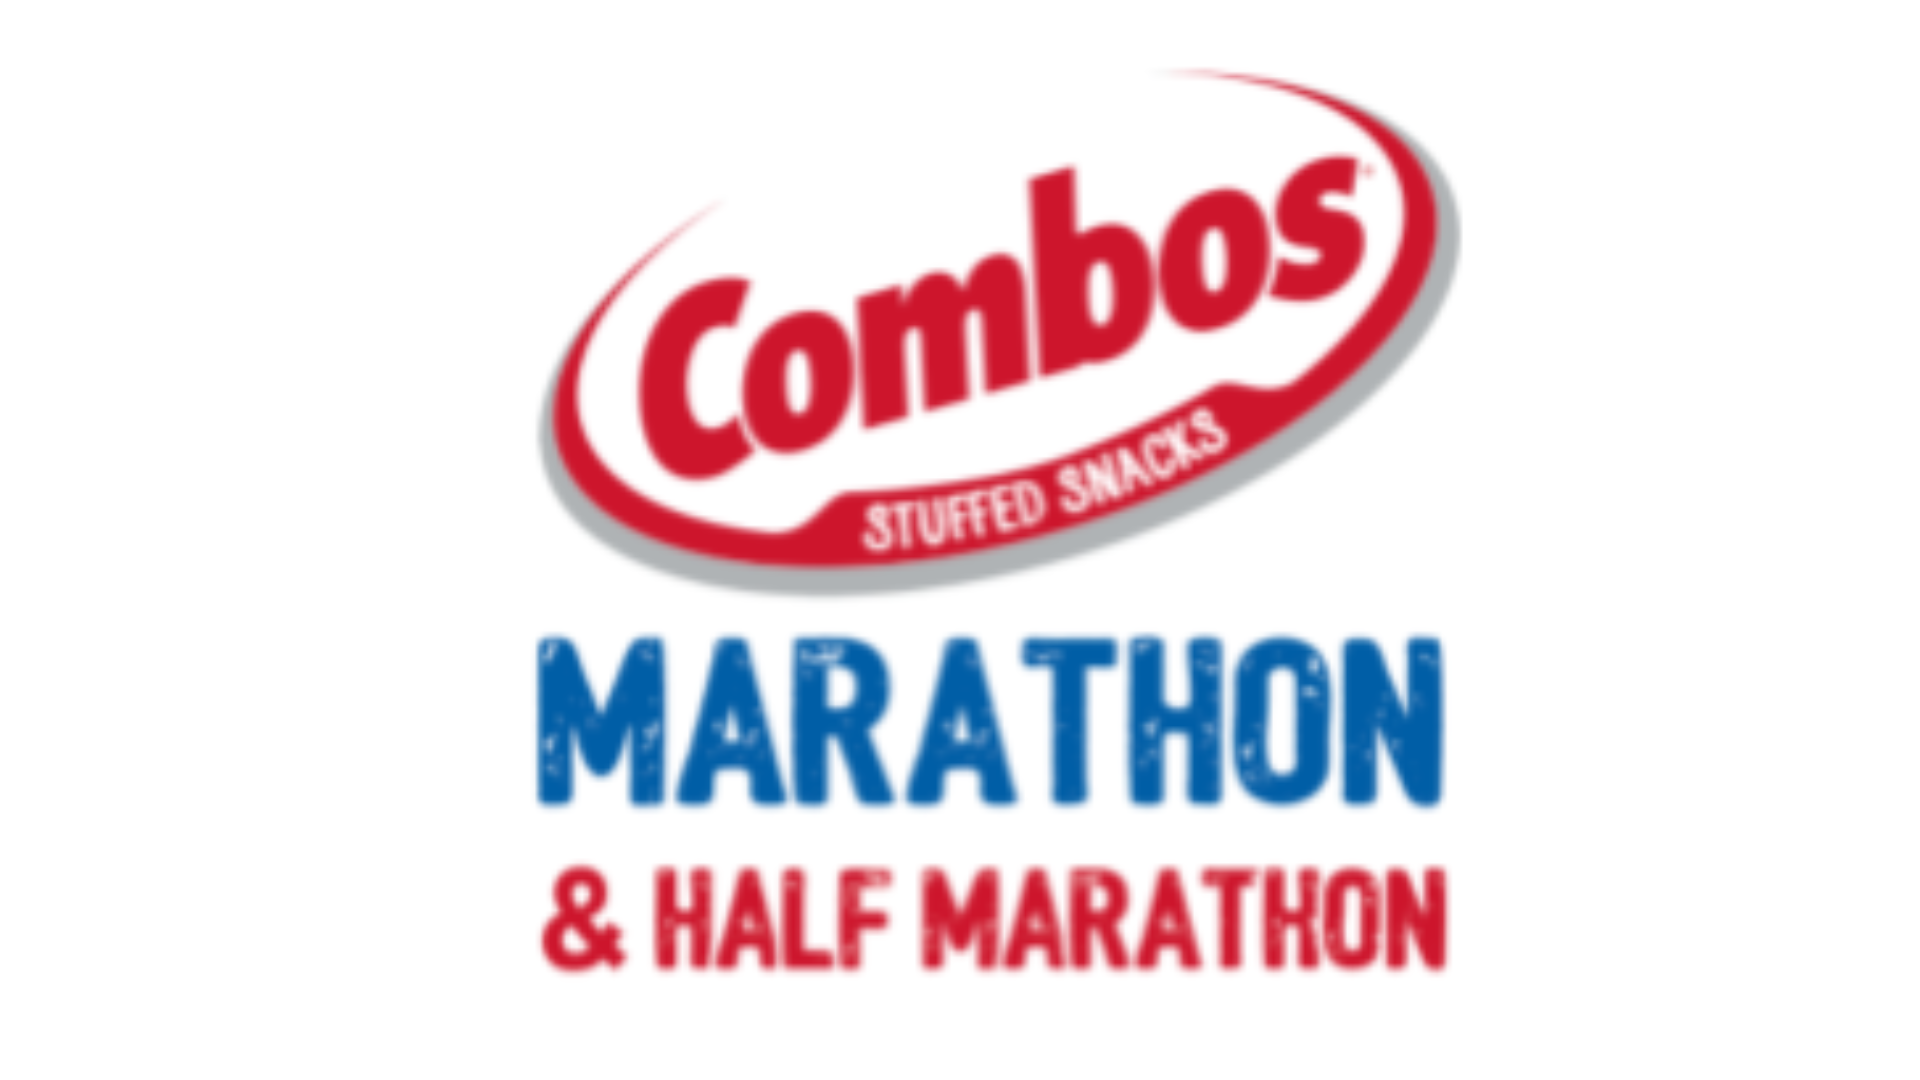 What to expect from the 18th annual Combos and Half Marathon